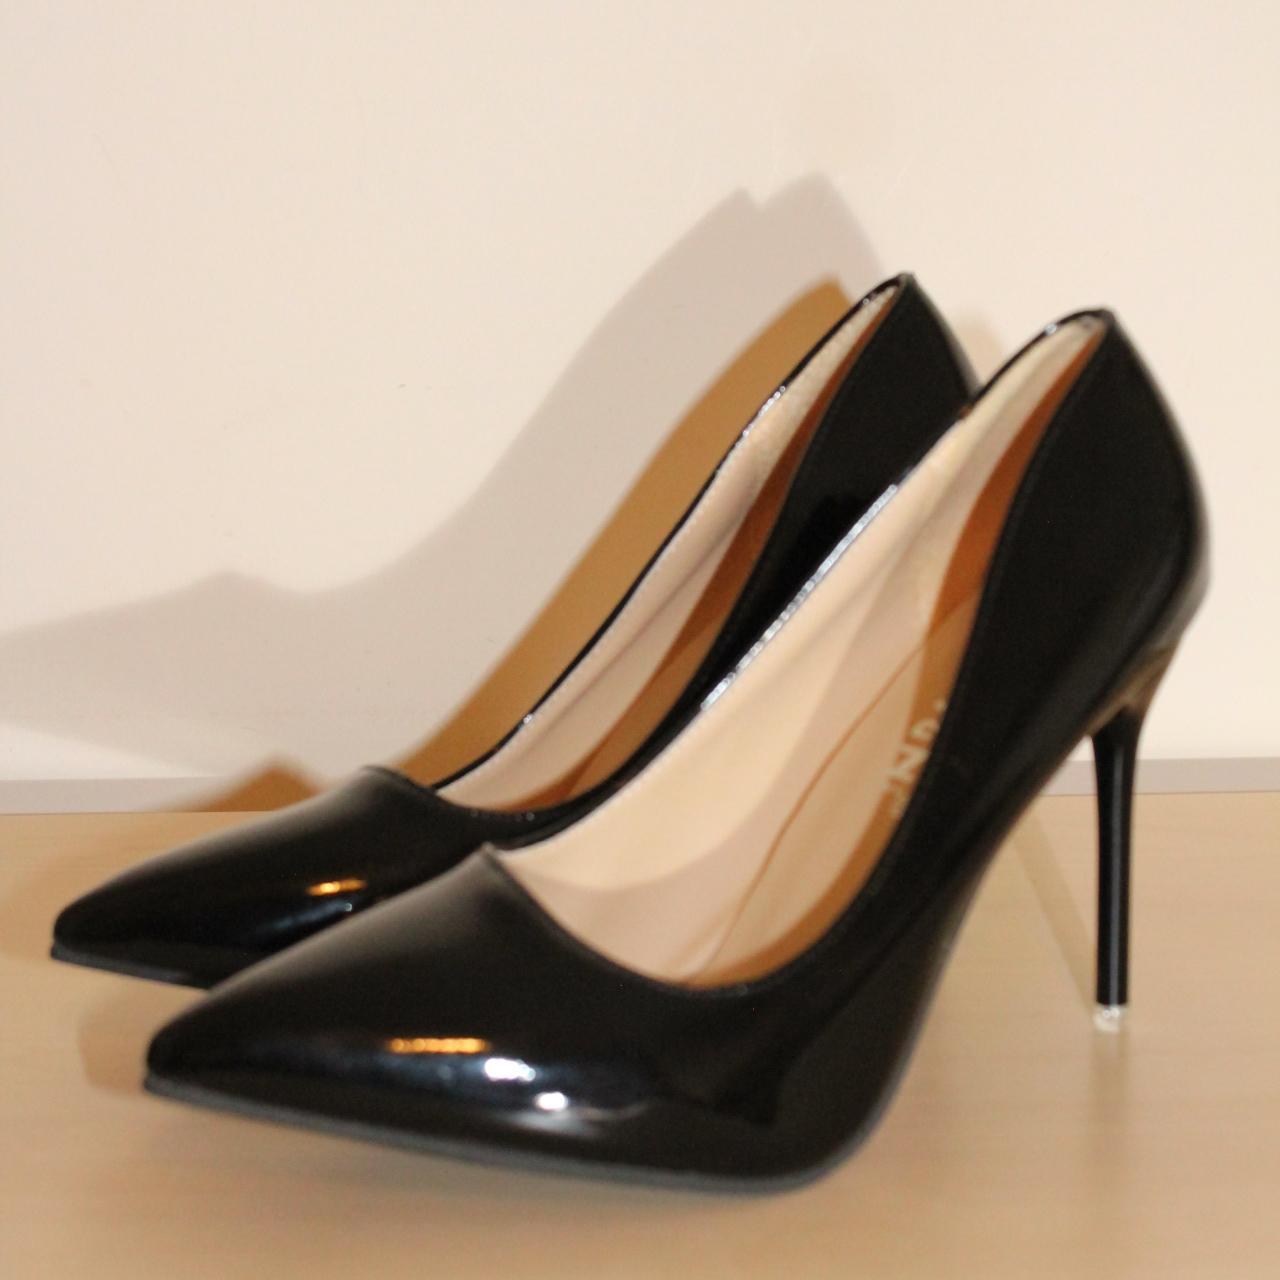 Womes brand new unworn, stiletto shoes. Approx 4